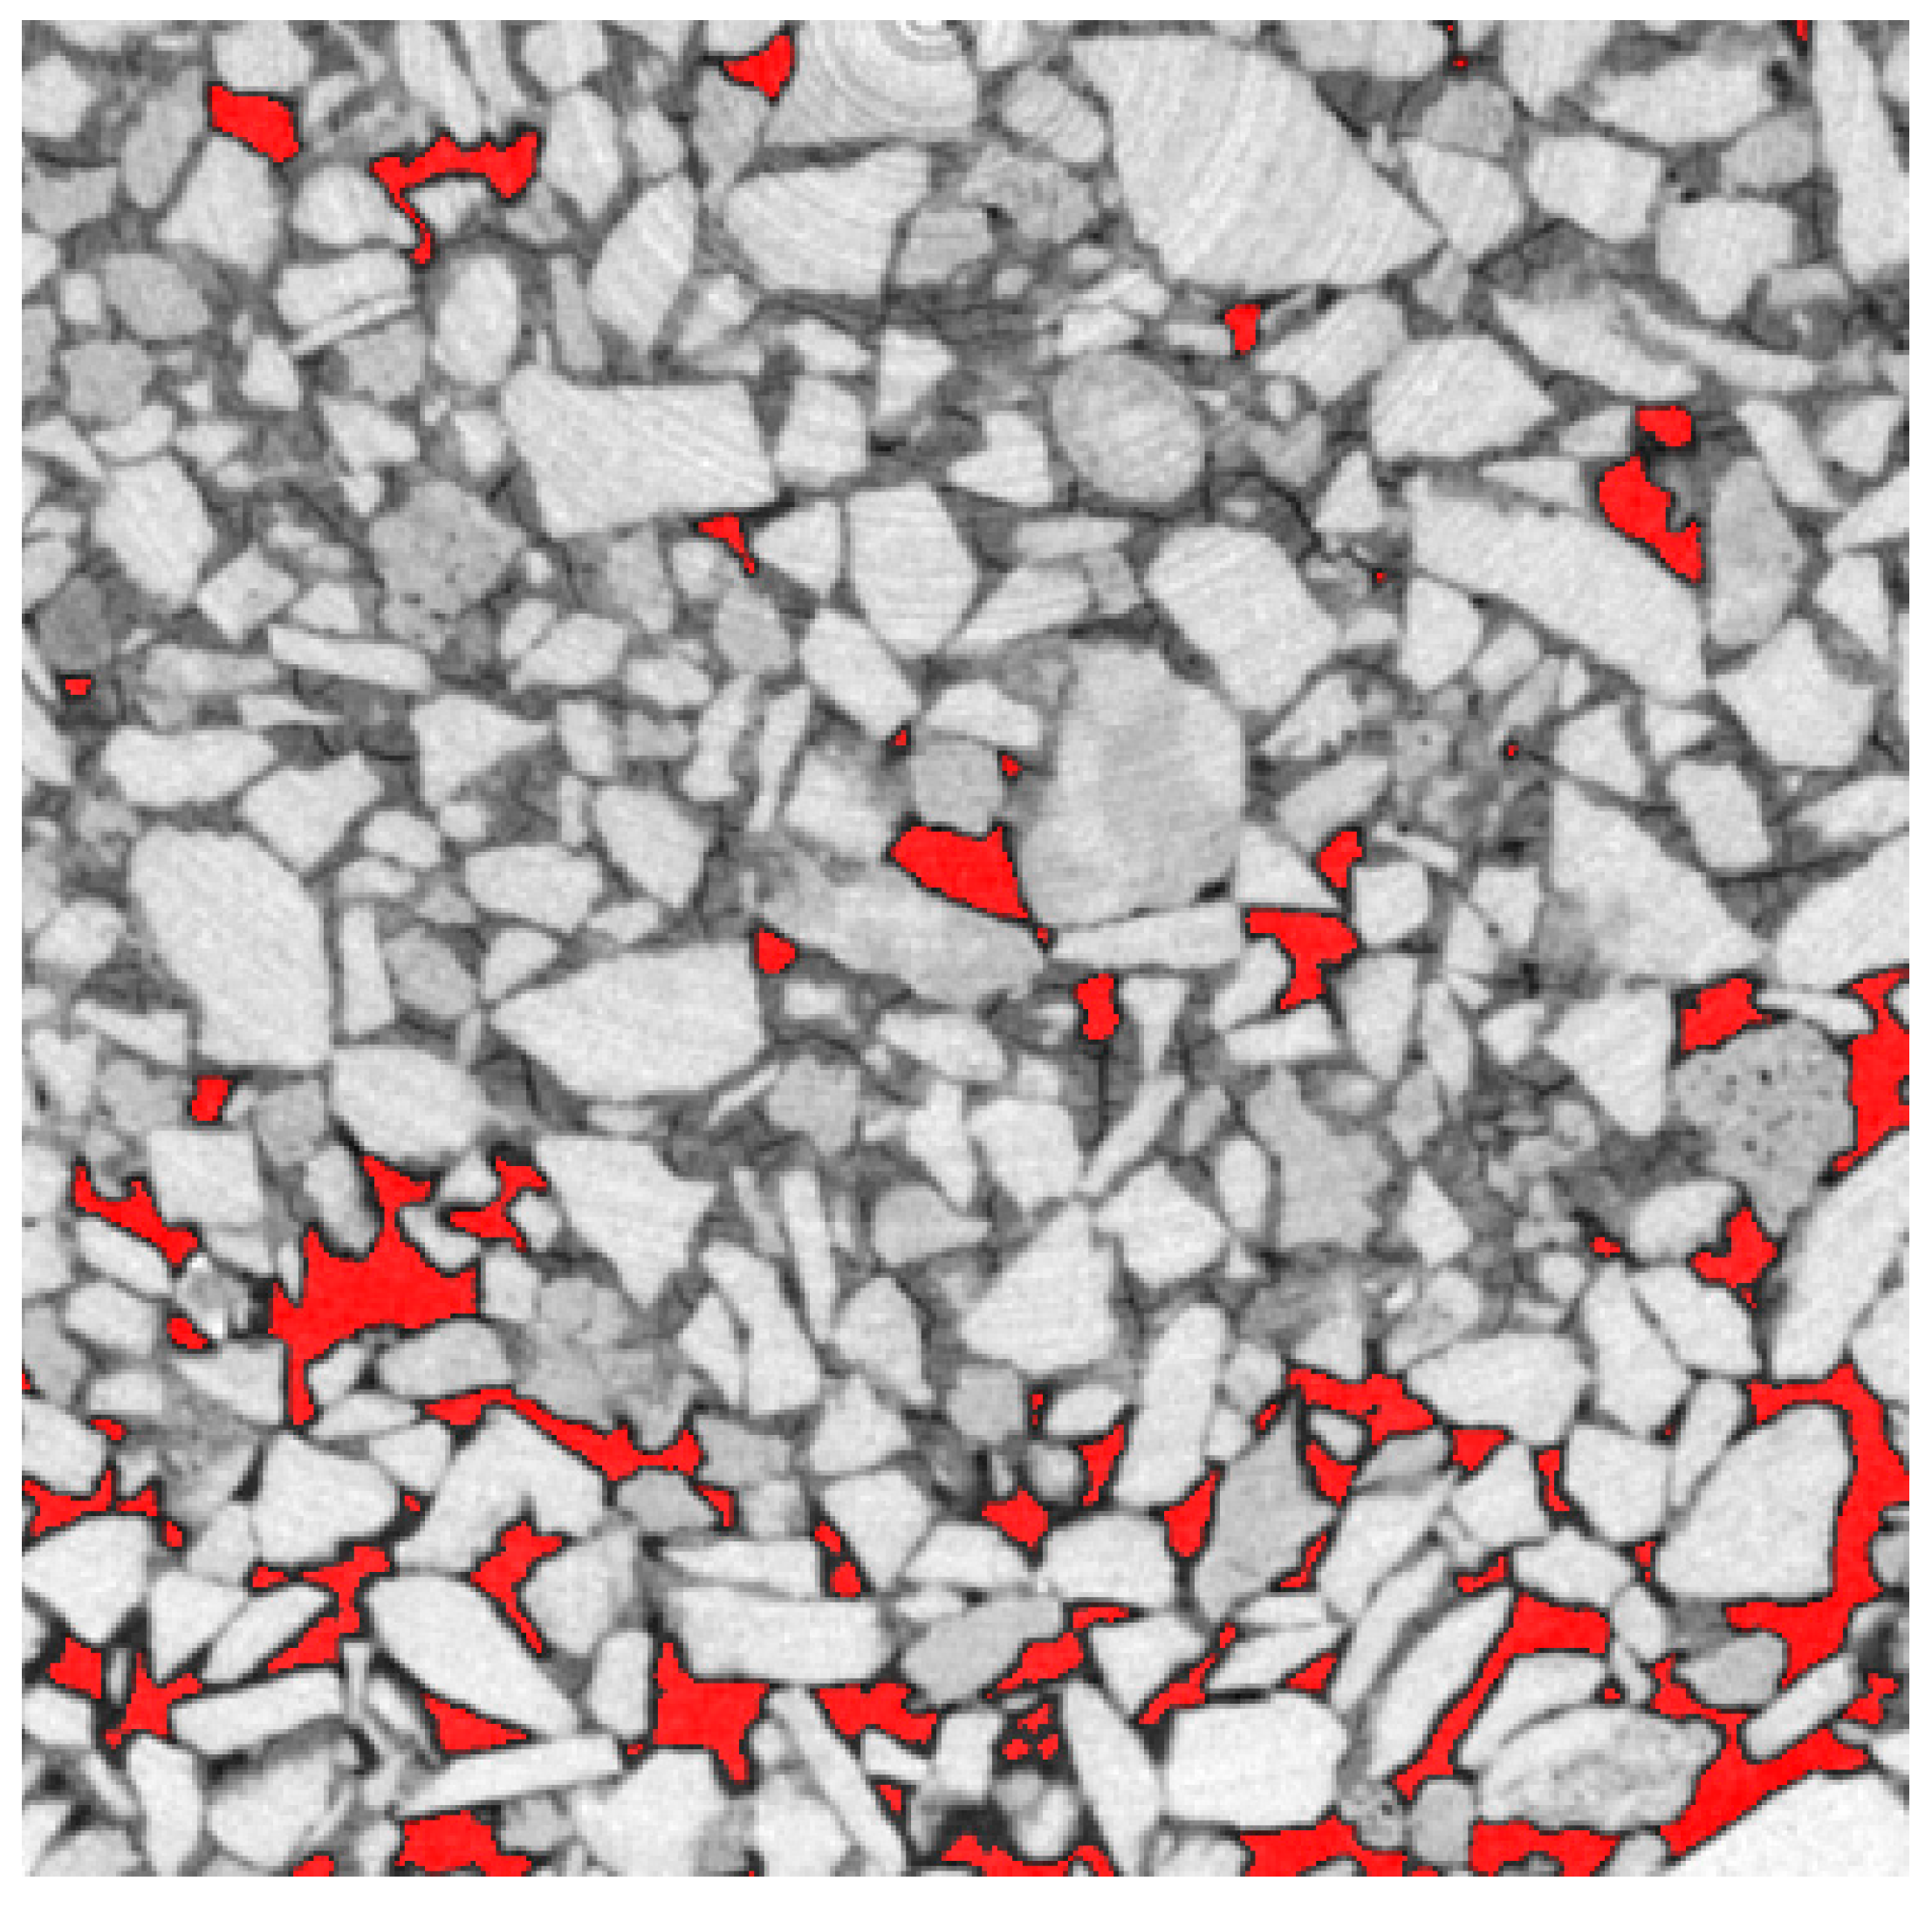 Time-lapse imaging of particle invasion and deposition in porous